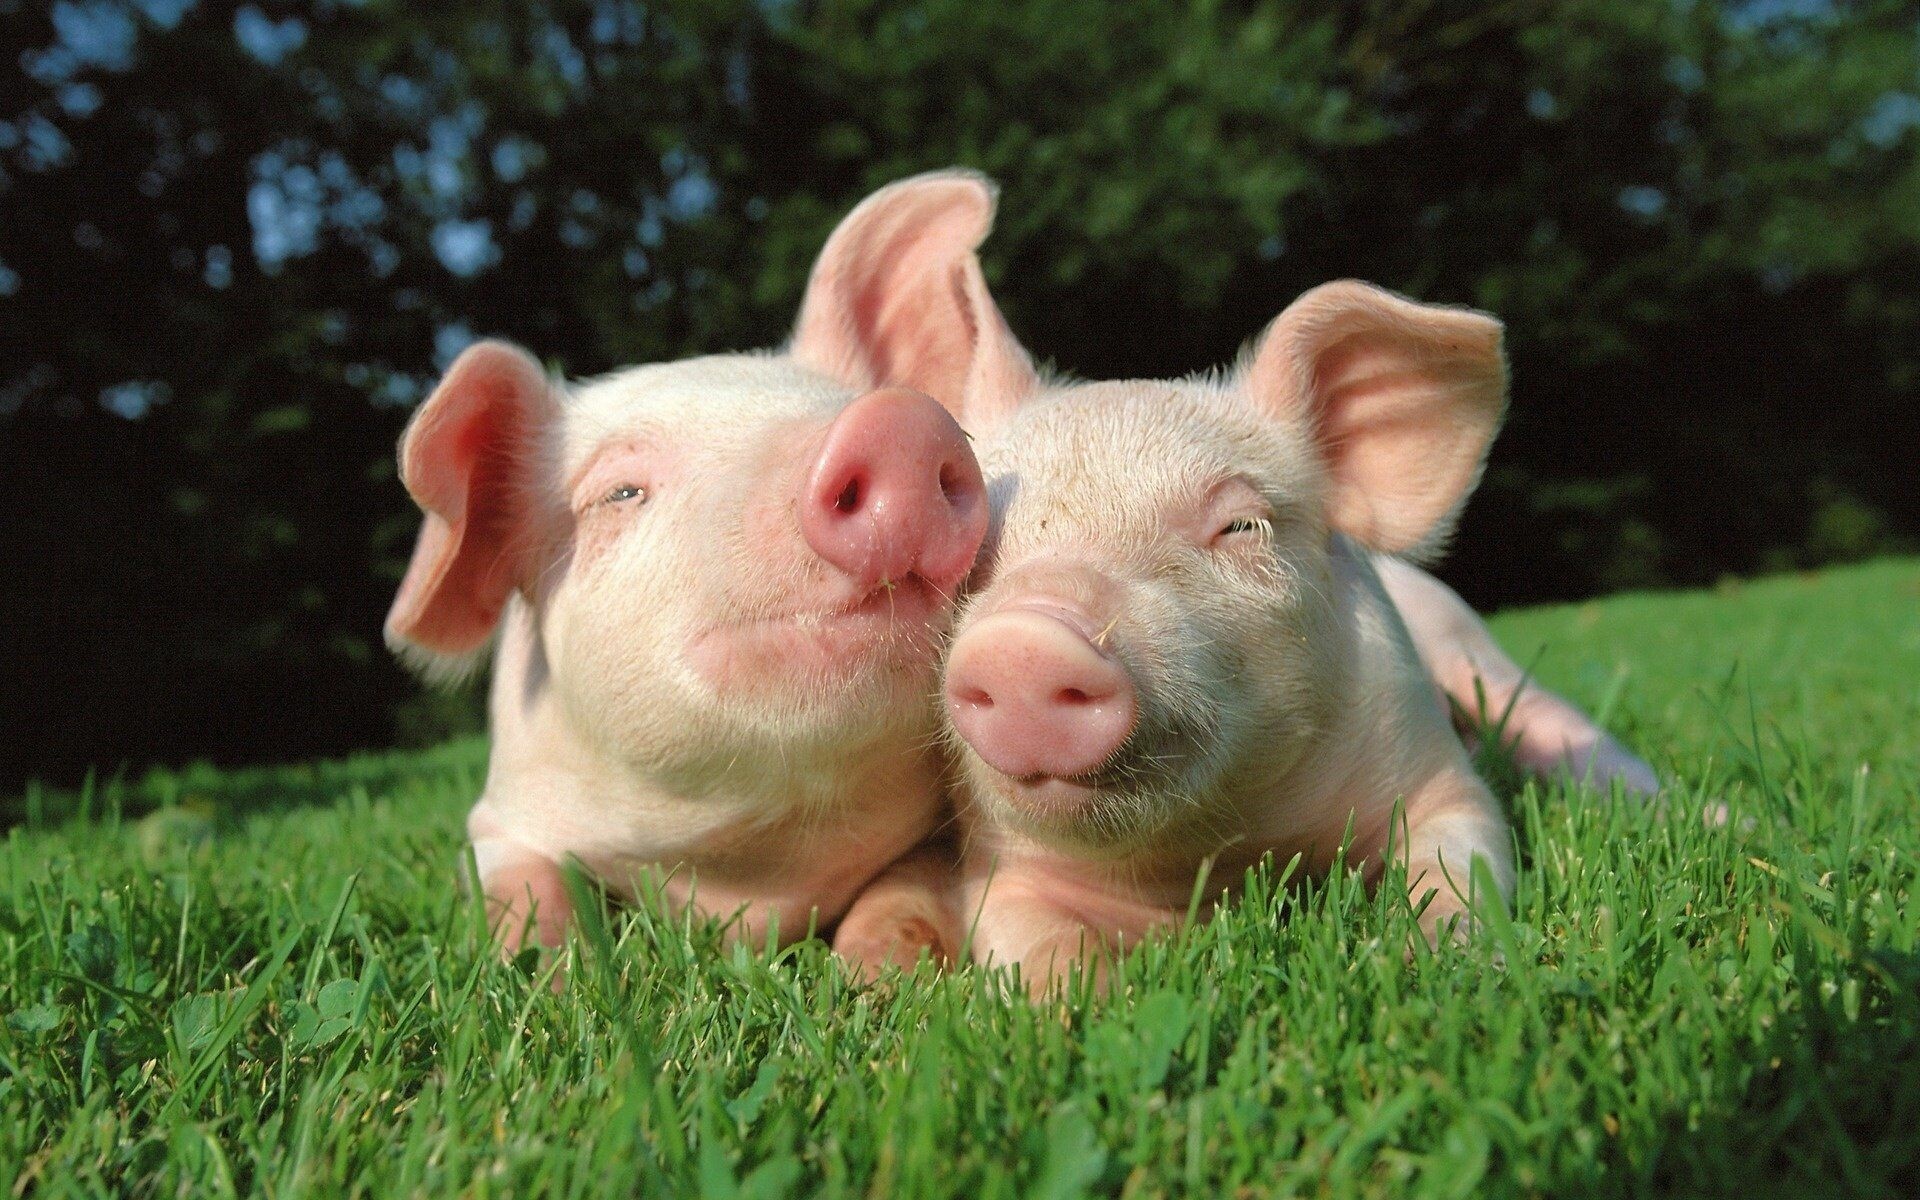 Pig wallpapers in HD, Charming and cute, Adorable farm animals, Playful antics, 1920x1200 HD Desktop